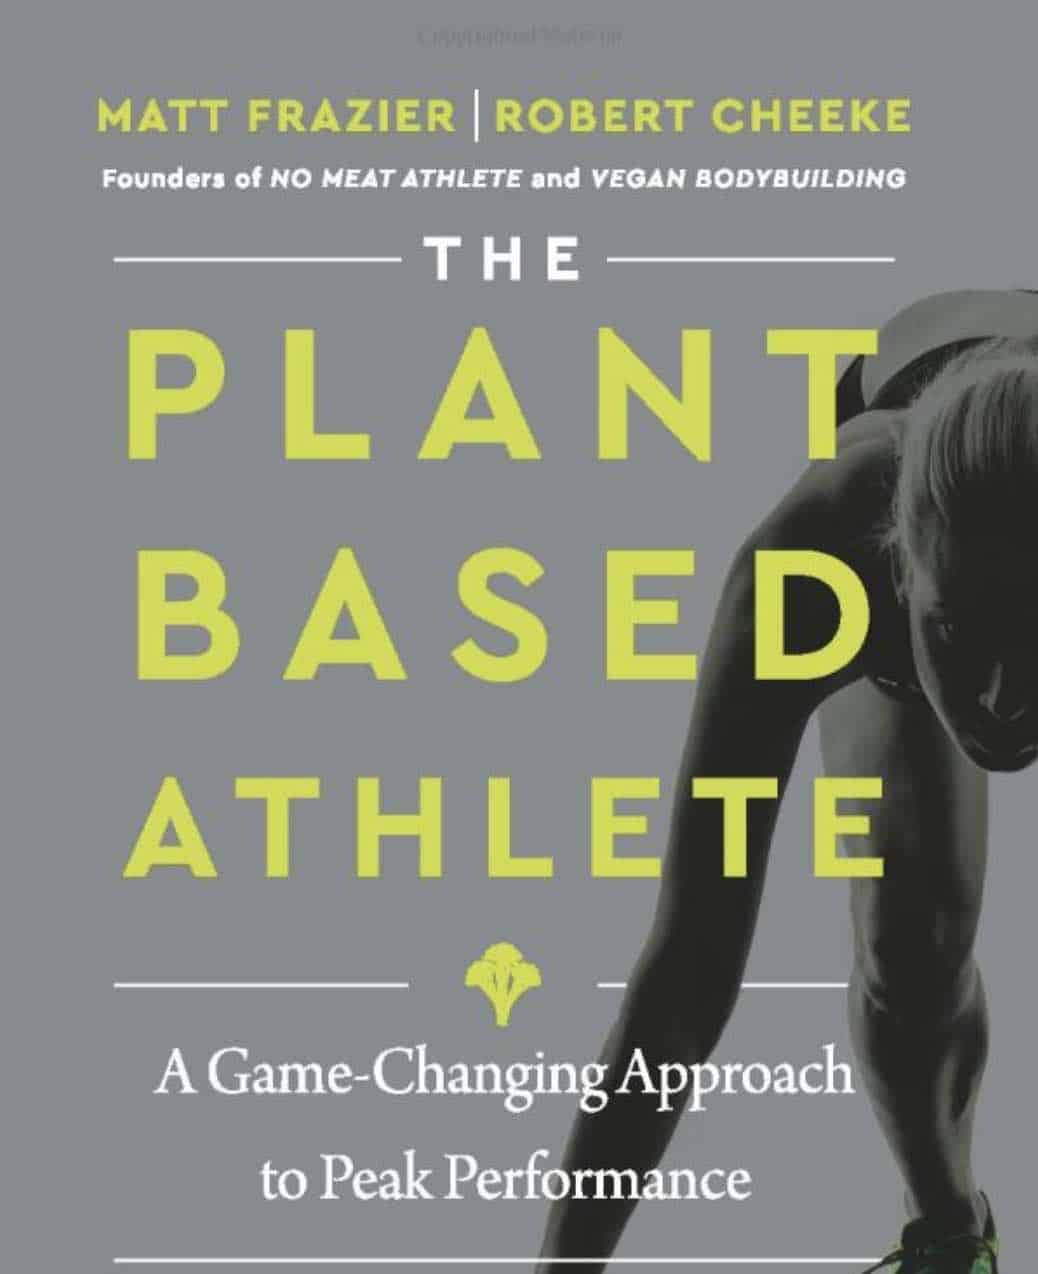 The Plant Based Athlete reveals the secret to top athletic performance.